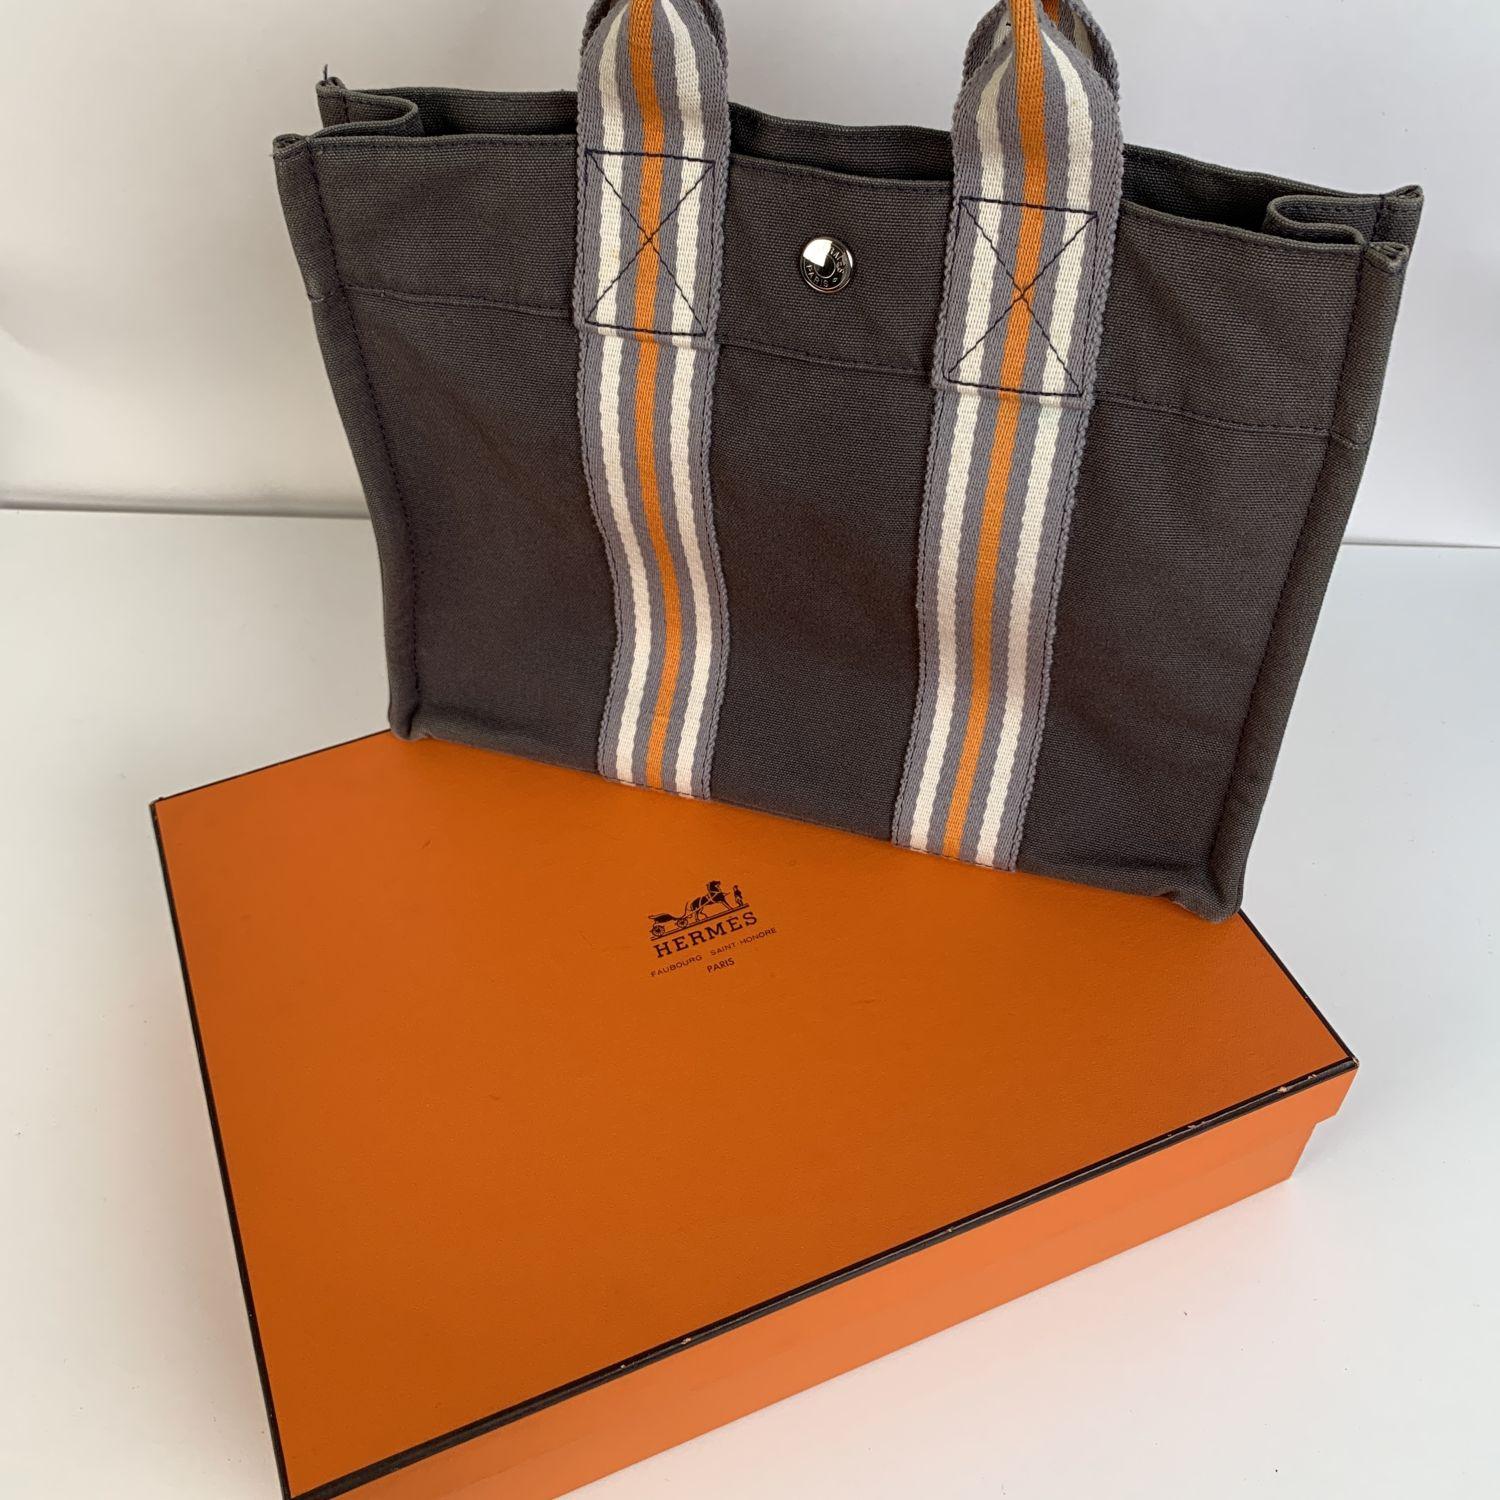 Hermes Paris Gray Fourre Tout PM Ginza 2001 Bag Limited Ed with Box 1